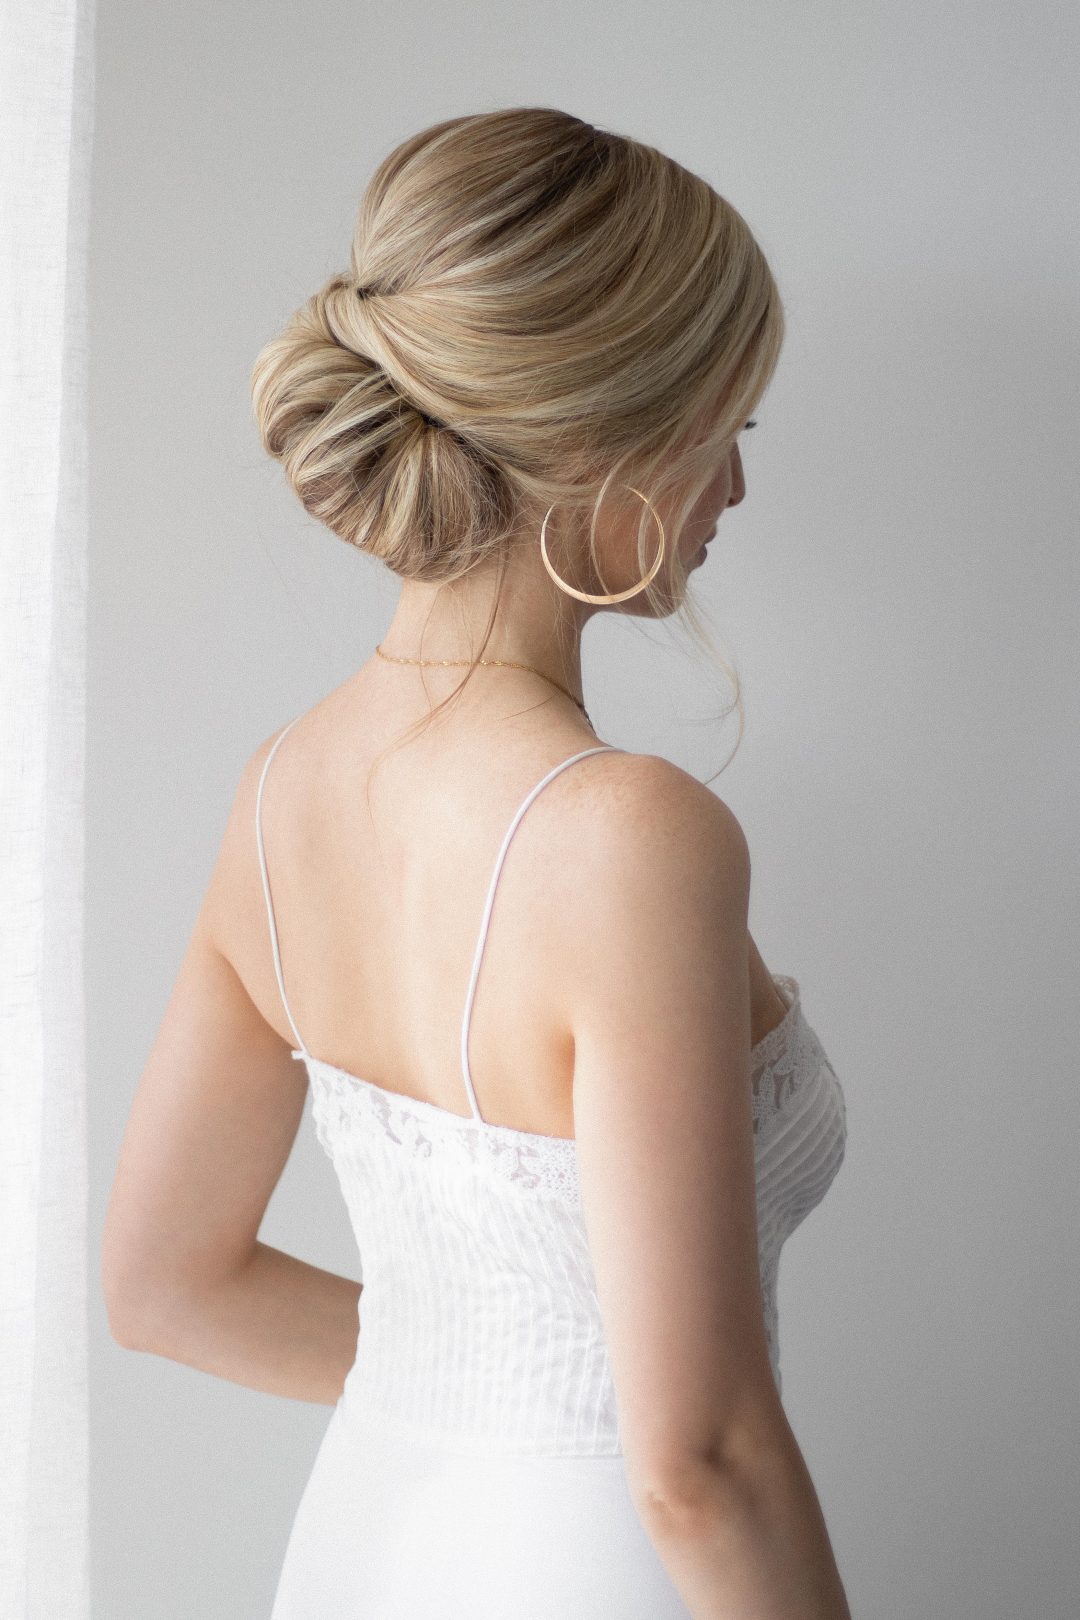 UPDO HAIR TUTORIAL, THE PERFECT WEDDING HAIRSTYLE www.alexgaboury.com